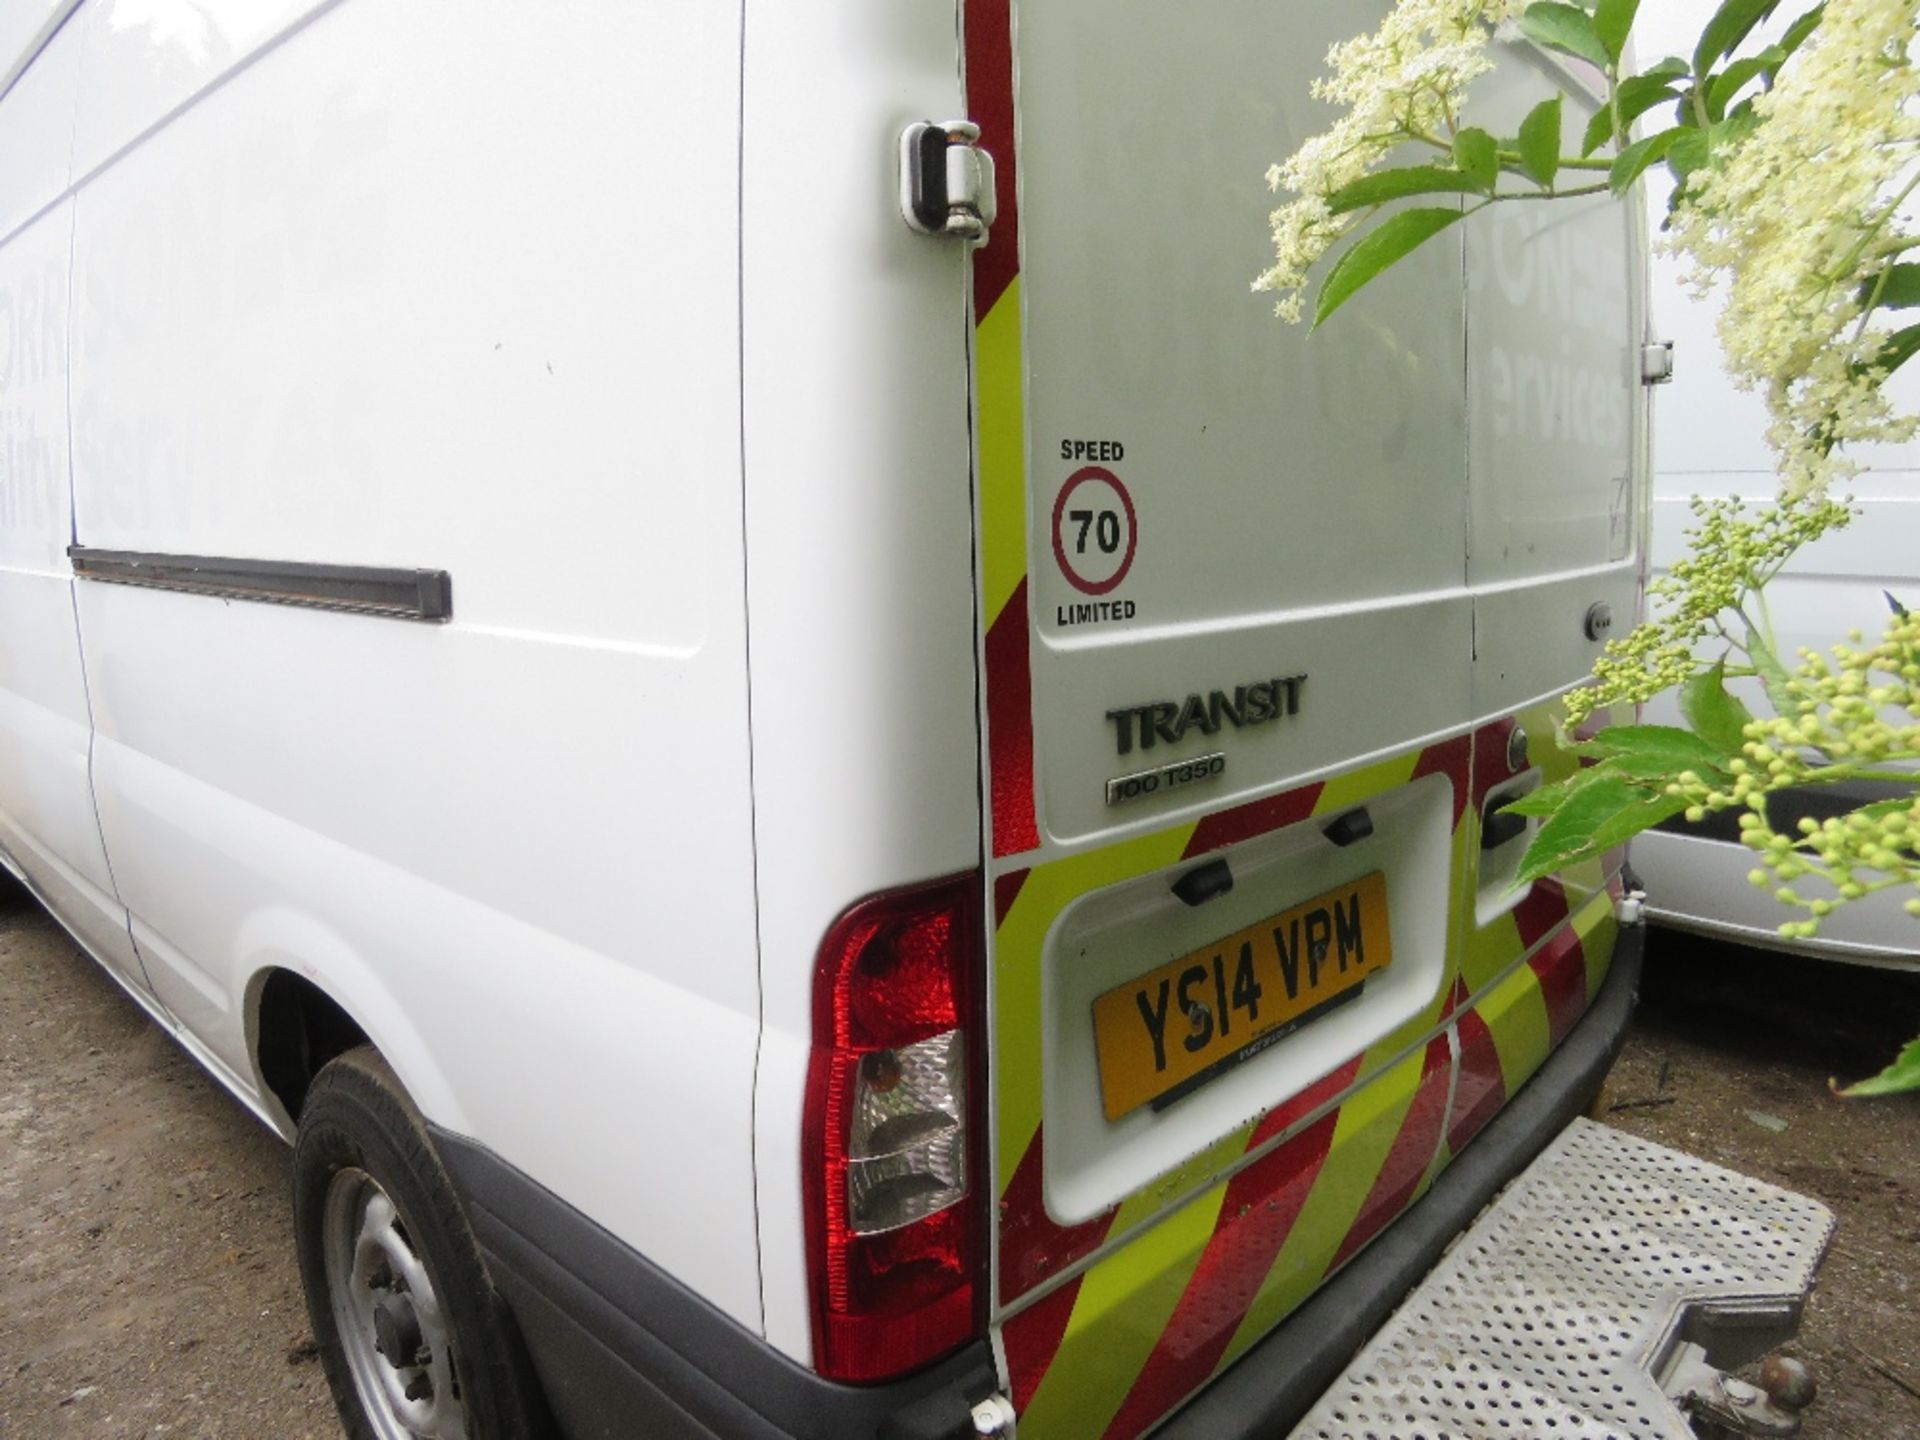 FORD TRANSIT PANEL VAN REG:YS14 VPM WITH ONBOARD COMPRESSOR AND GENERATOR. WITH V5 PLUS MOT TILL MAY - Image 5 of 10